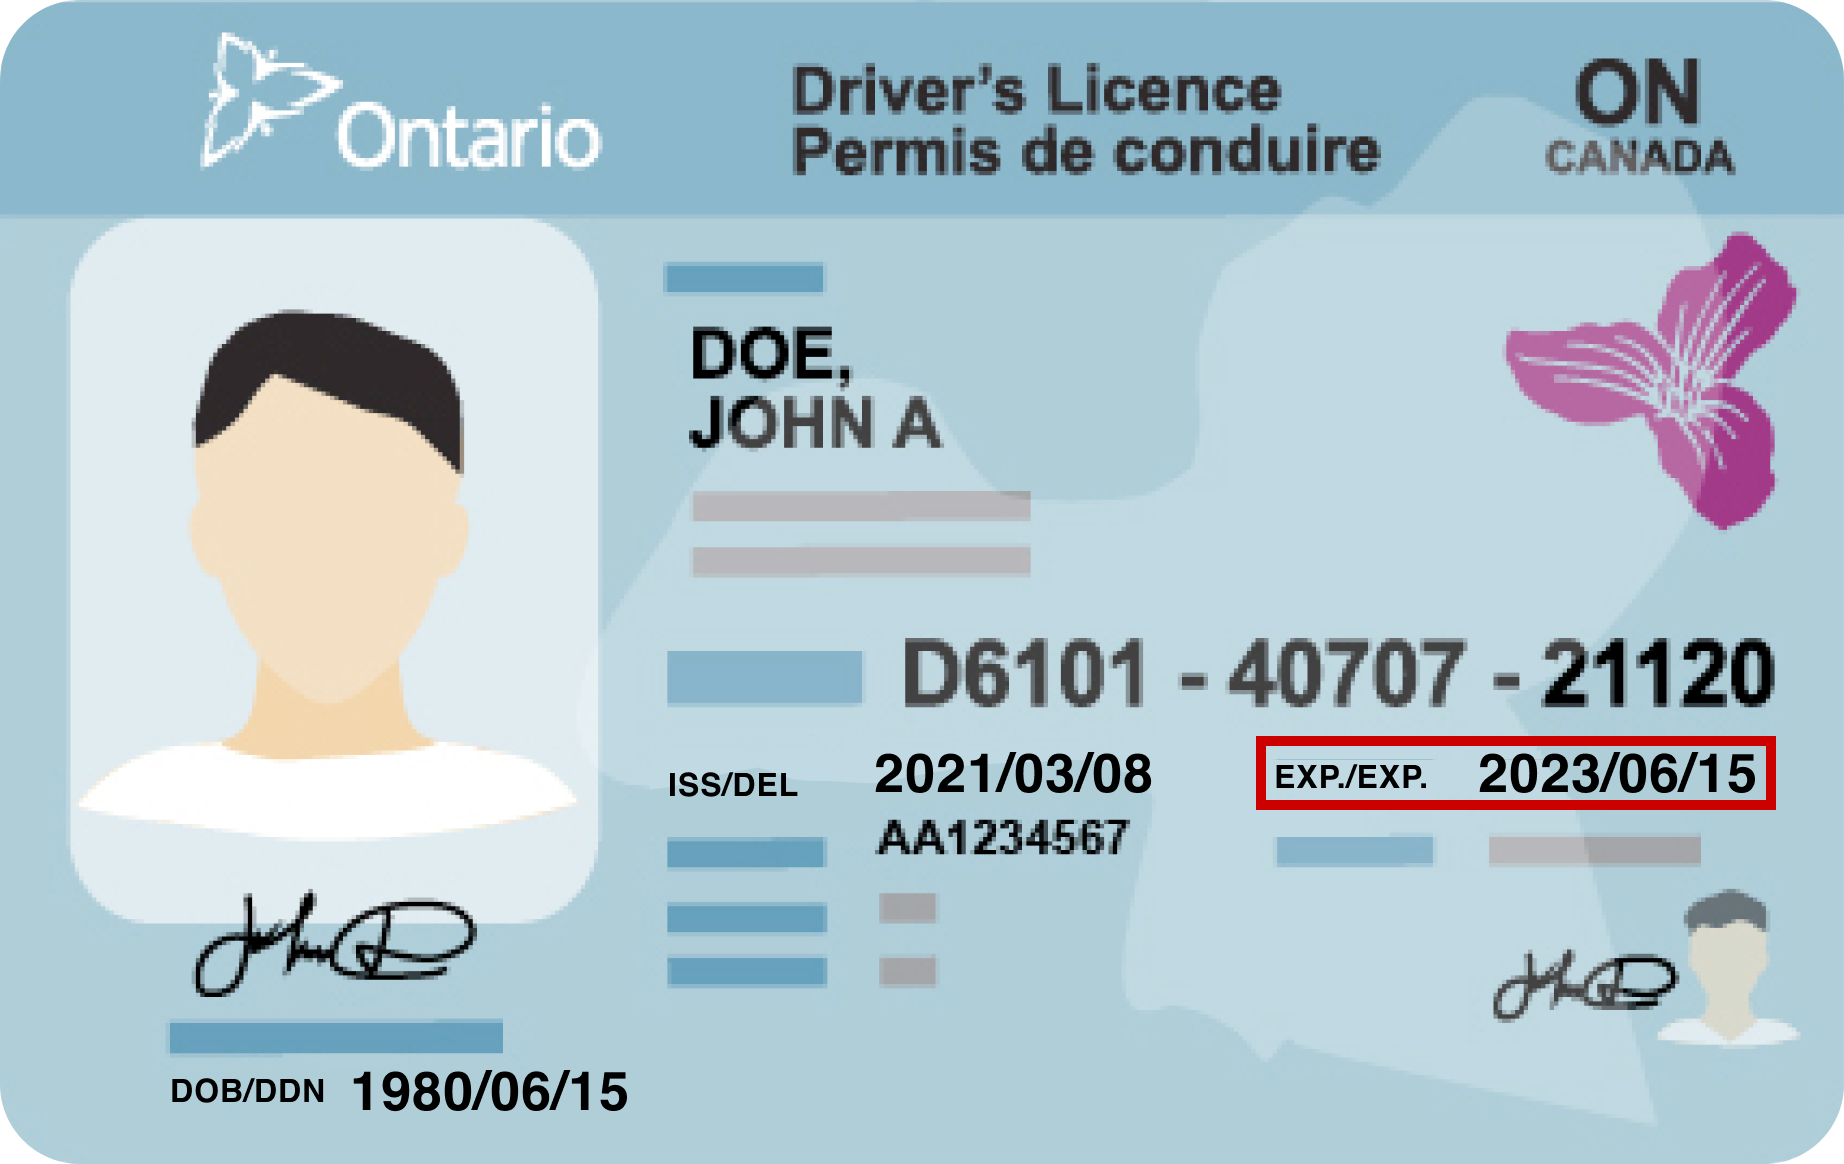 Example of a Driver’s License highlighting the expiry date format to follow.